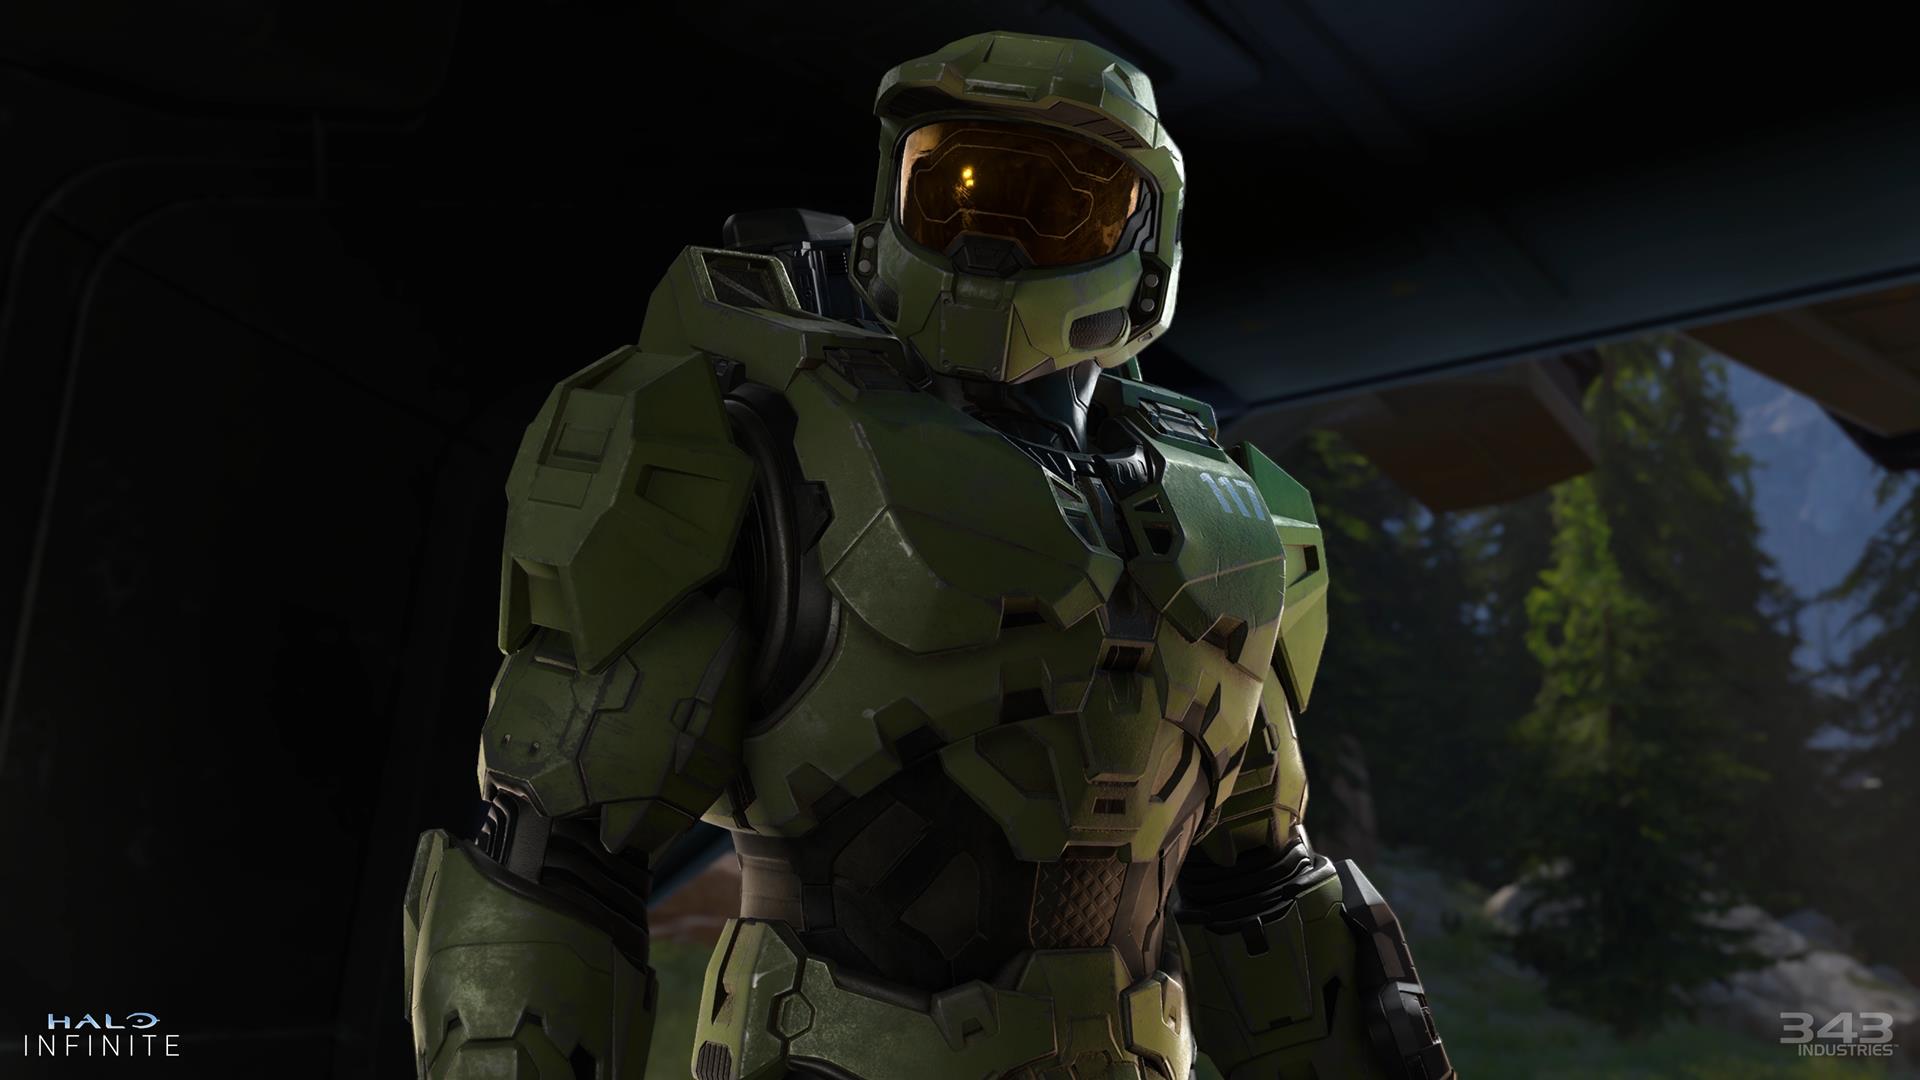 Image for All Halo Infinite sandbox launch content is done, 343 working on polish